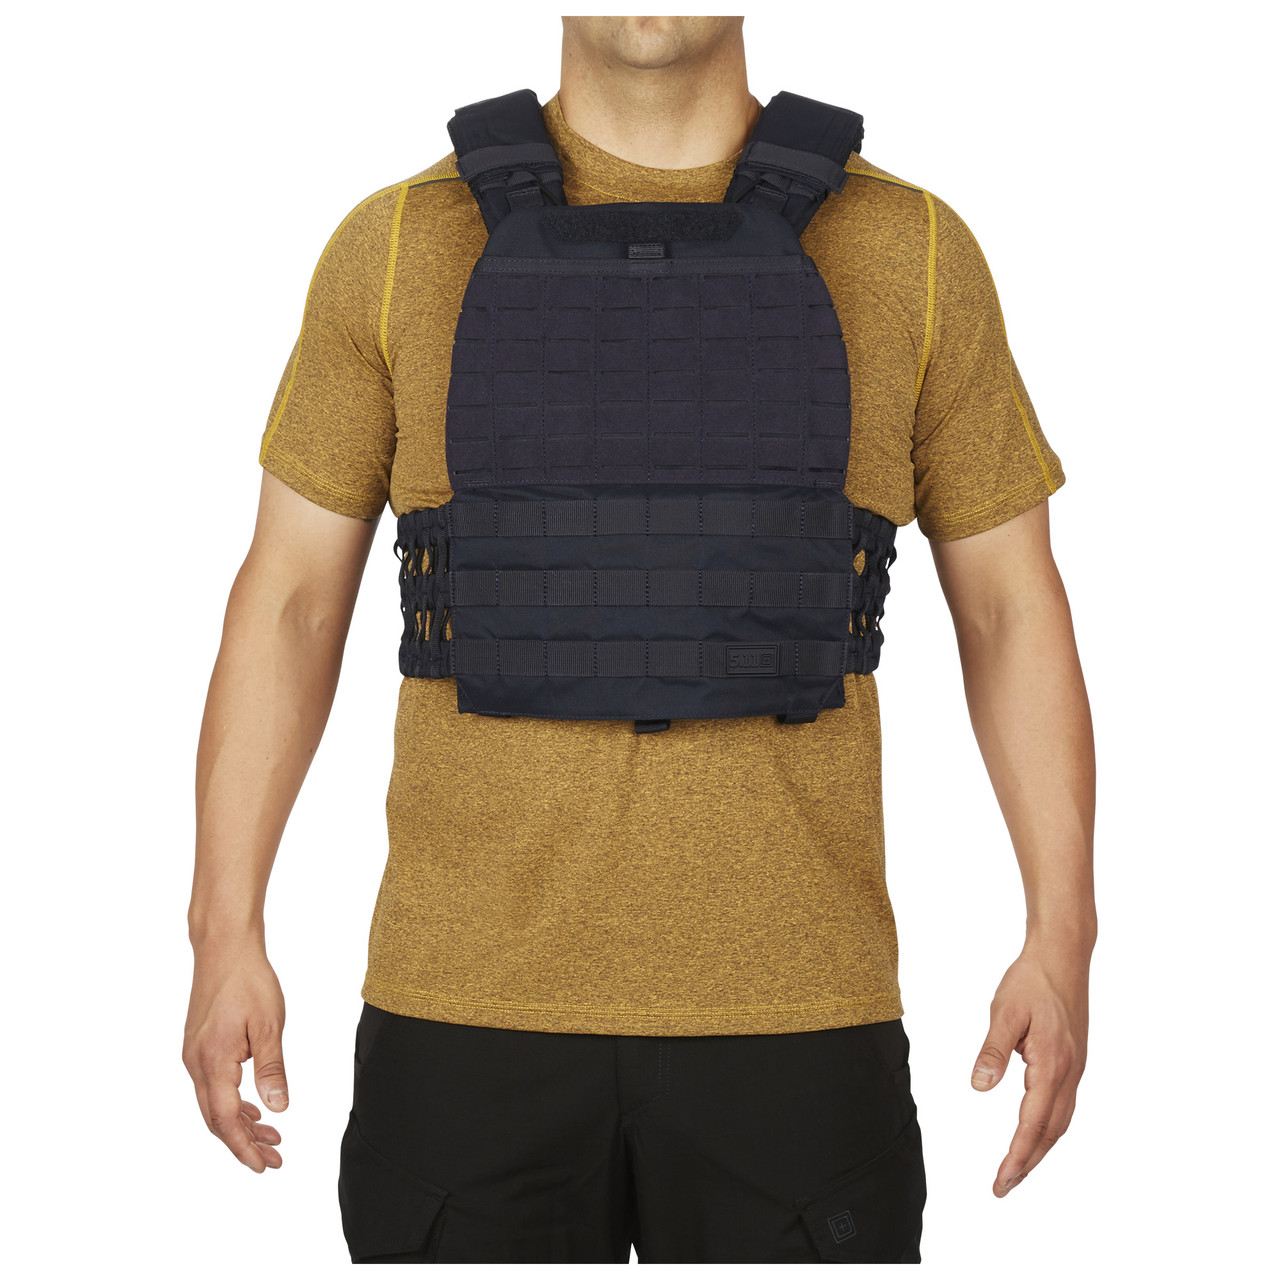 5.11 TacTec Plate Carrier (plates not included)